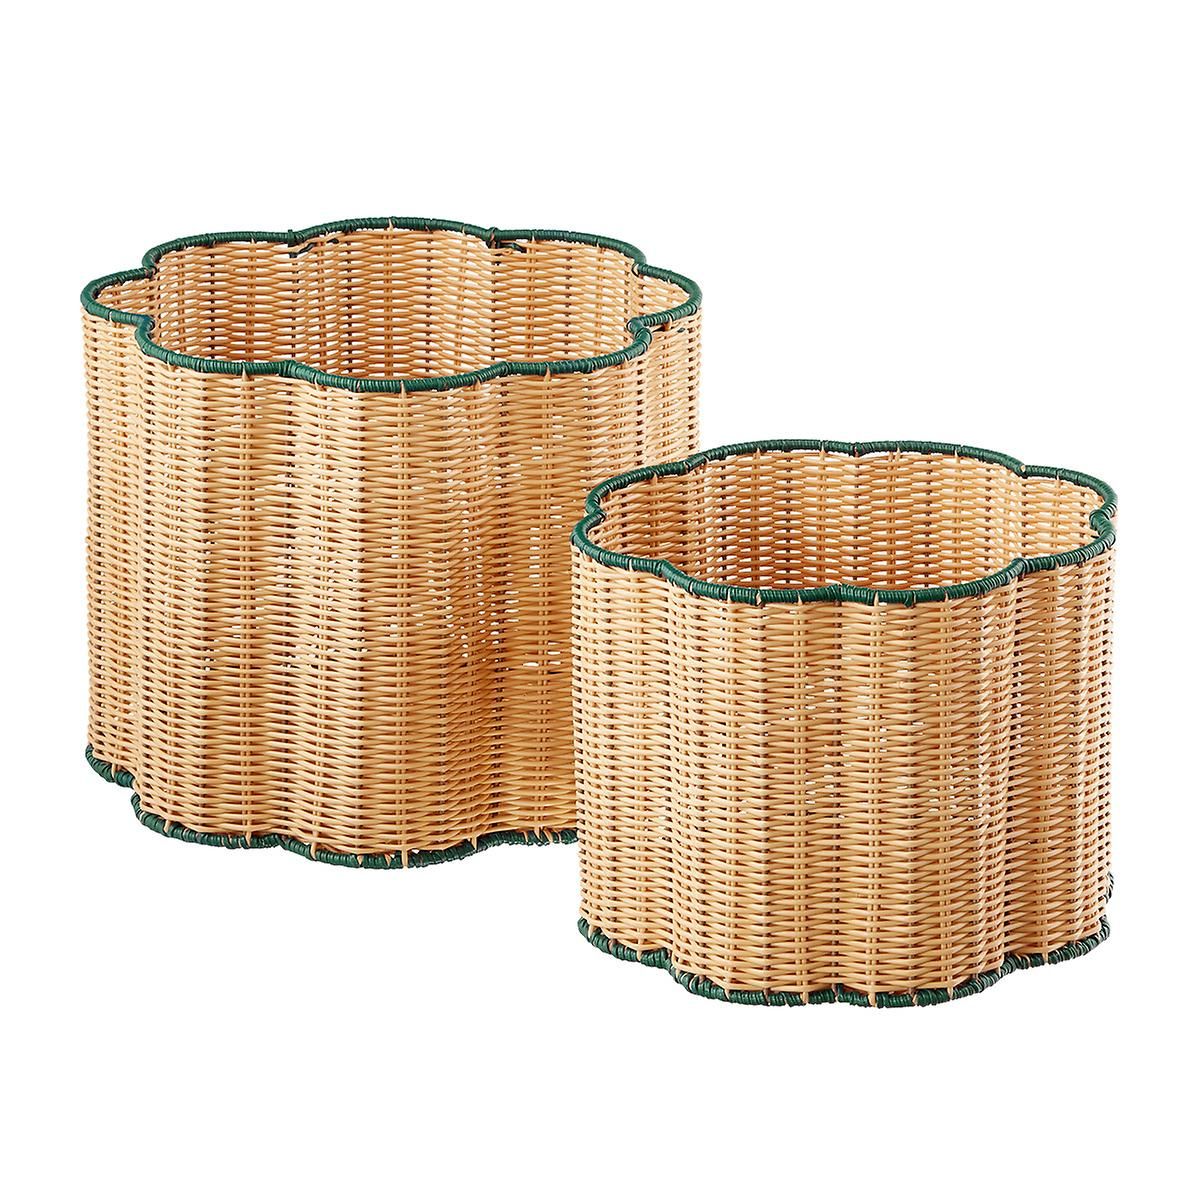 The Container Store Scalloped Edge Faux Rattan Bins | The Container Store